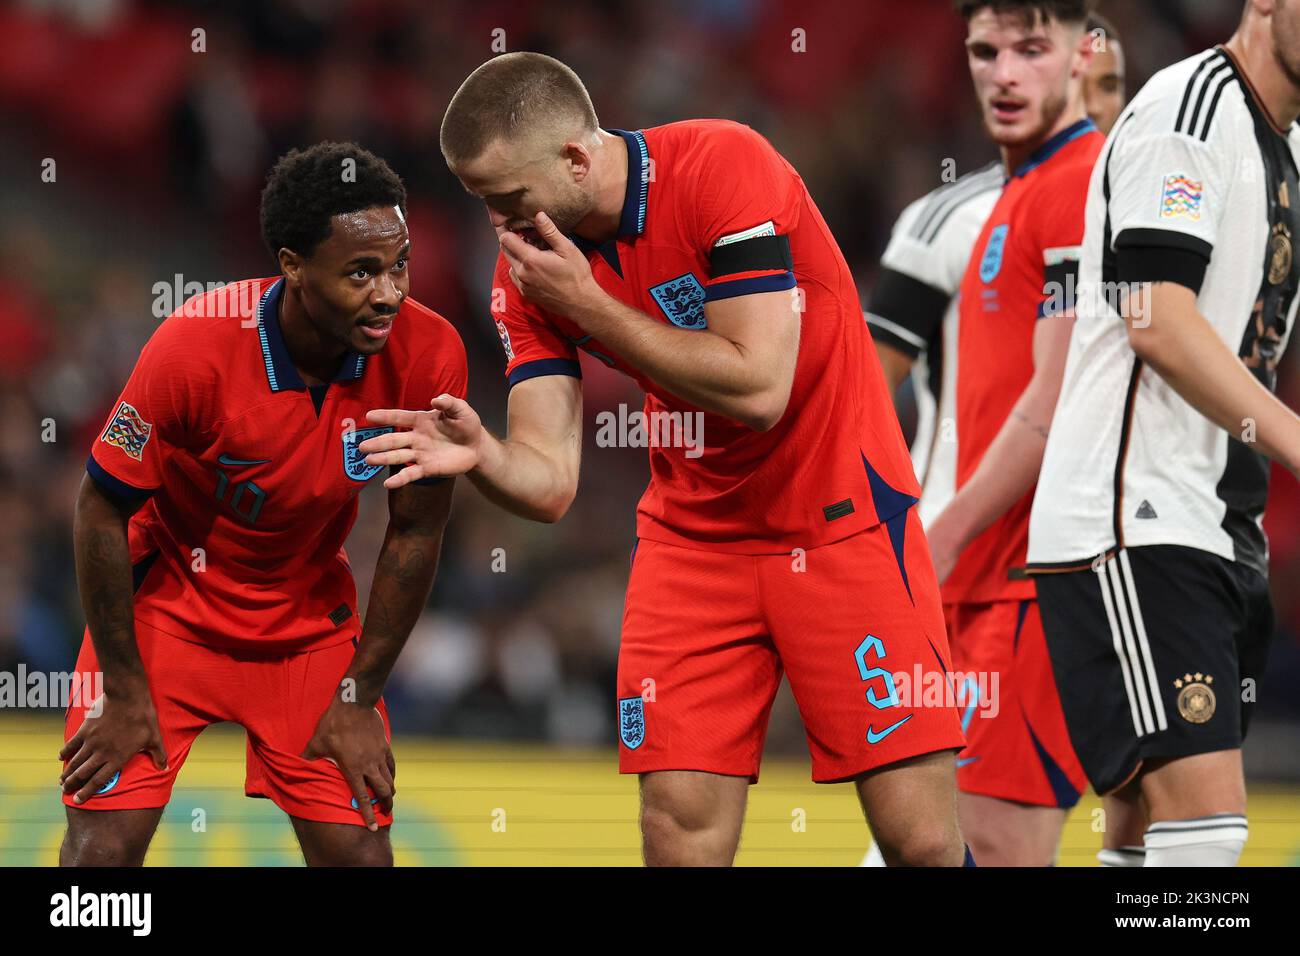 London, UK. 26th Sep, 2022. Eric Dier ofEngland (r) speaks with Raheem Sterling of England (l). England v Germany, UEFA Nations league International group C match at Wembley Stadium in London on Monday 26th September 2022. Editorial use only. pic by Andrew Orchard/Andrew Orchard sports photography/Alamy Live News Credit: Andrew Orchard sports photography/Alamy Live News Stock Photo